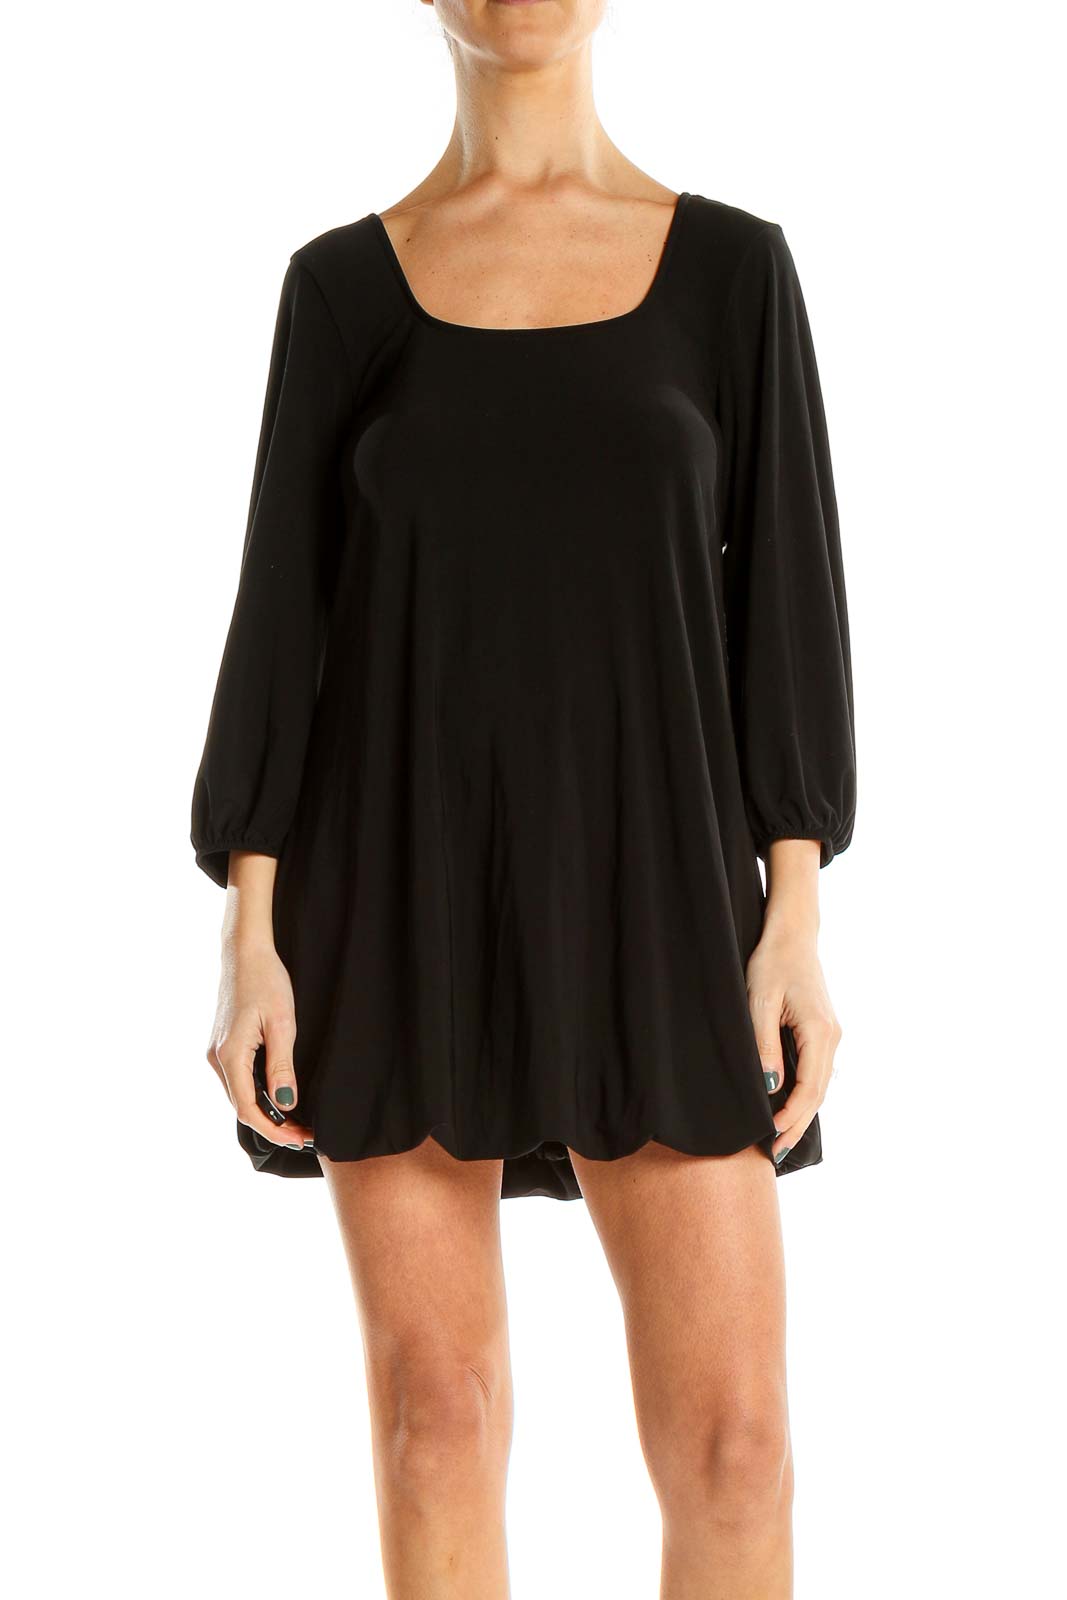 Black Shirt Dress With Scallop Edge Front